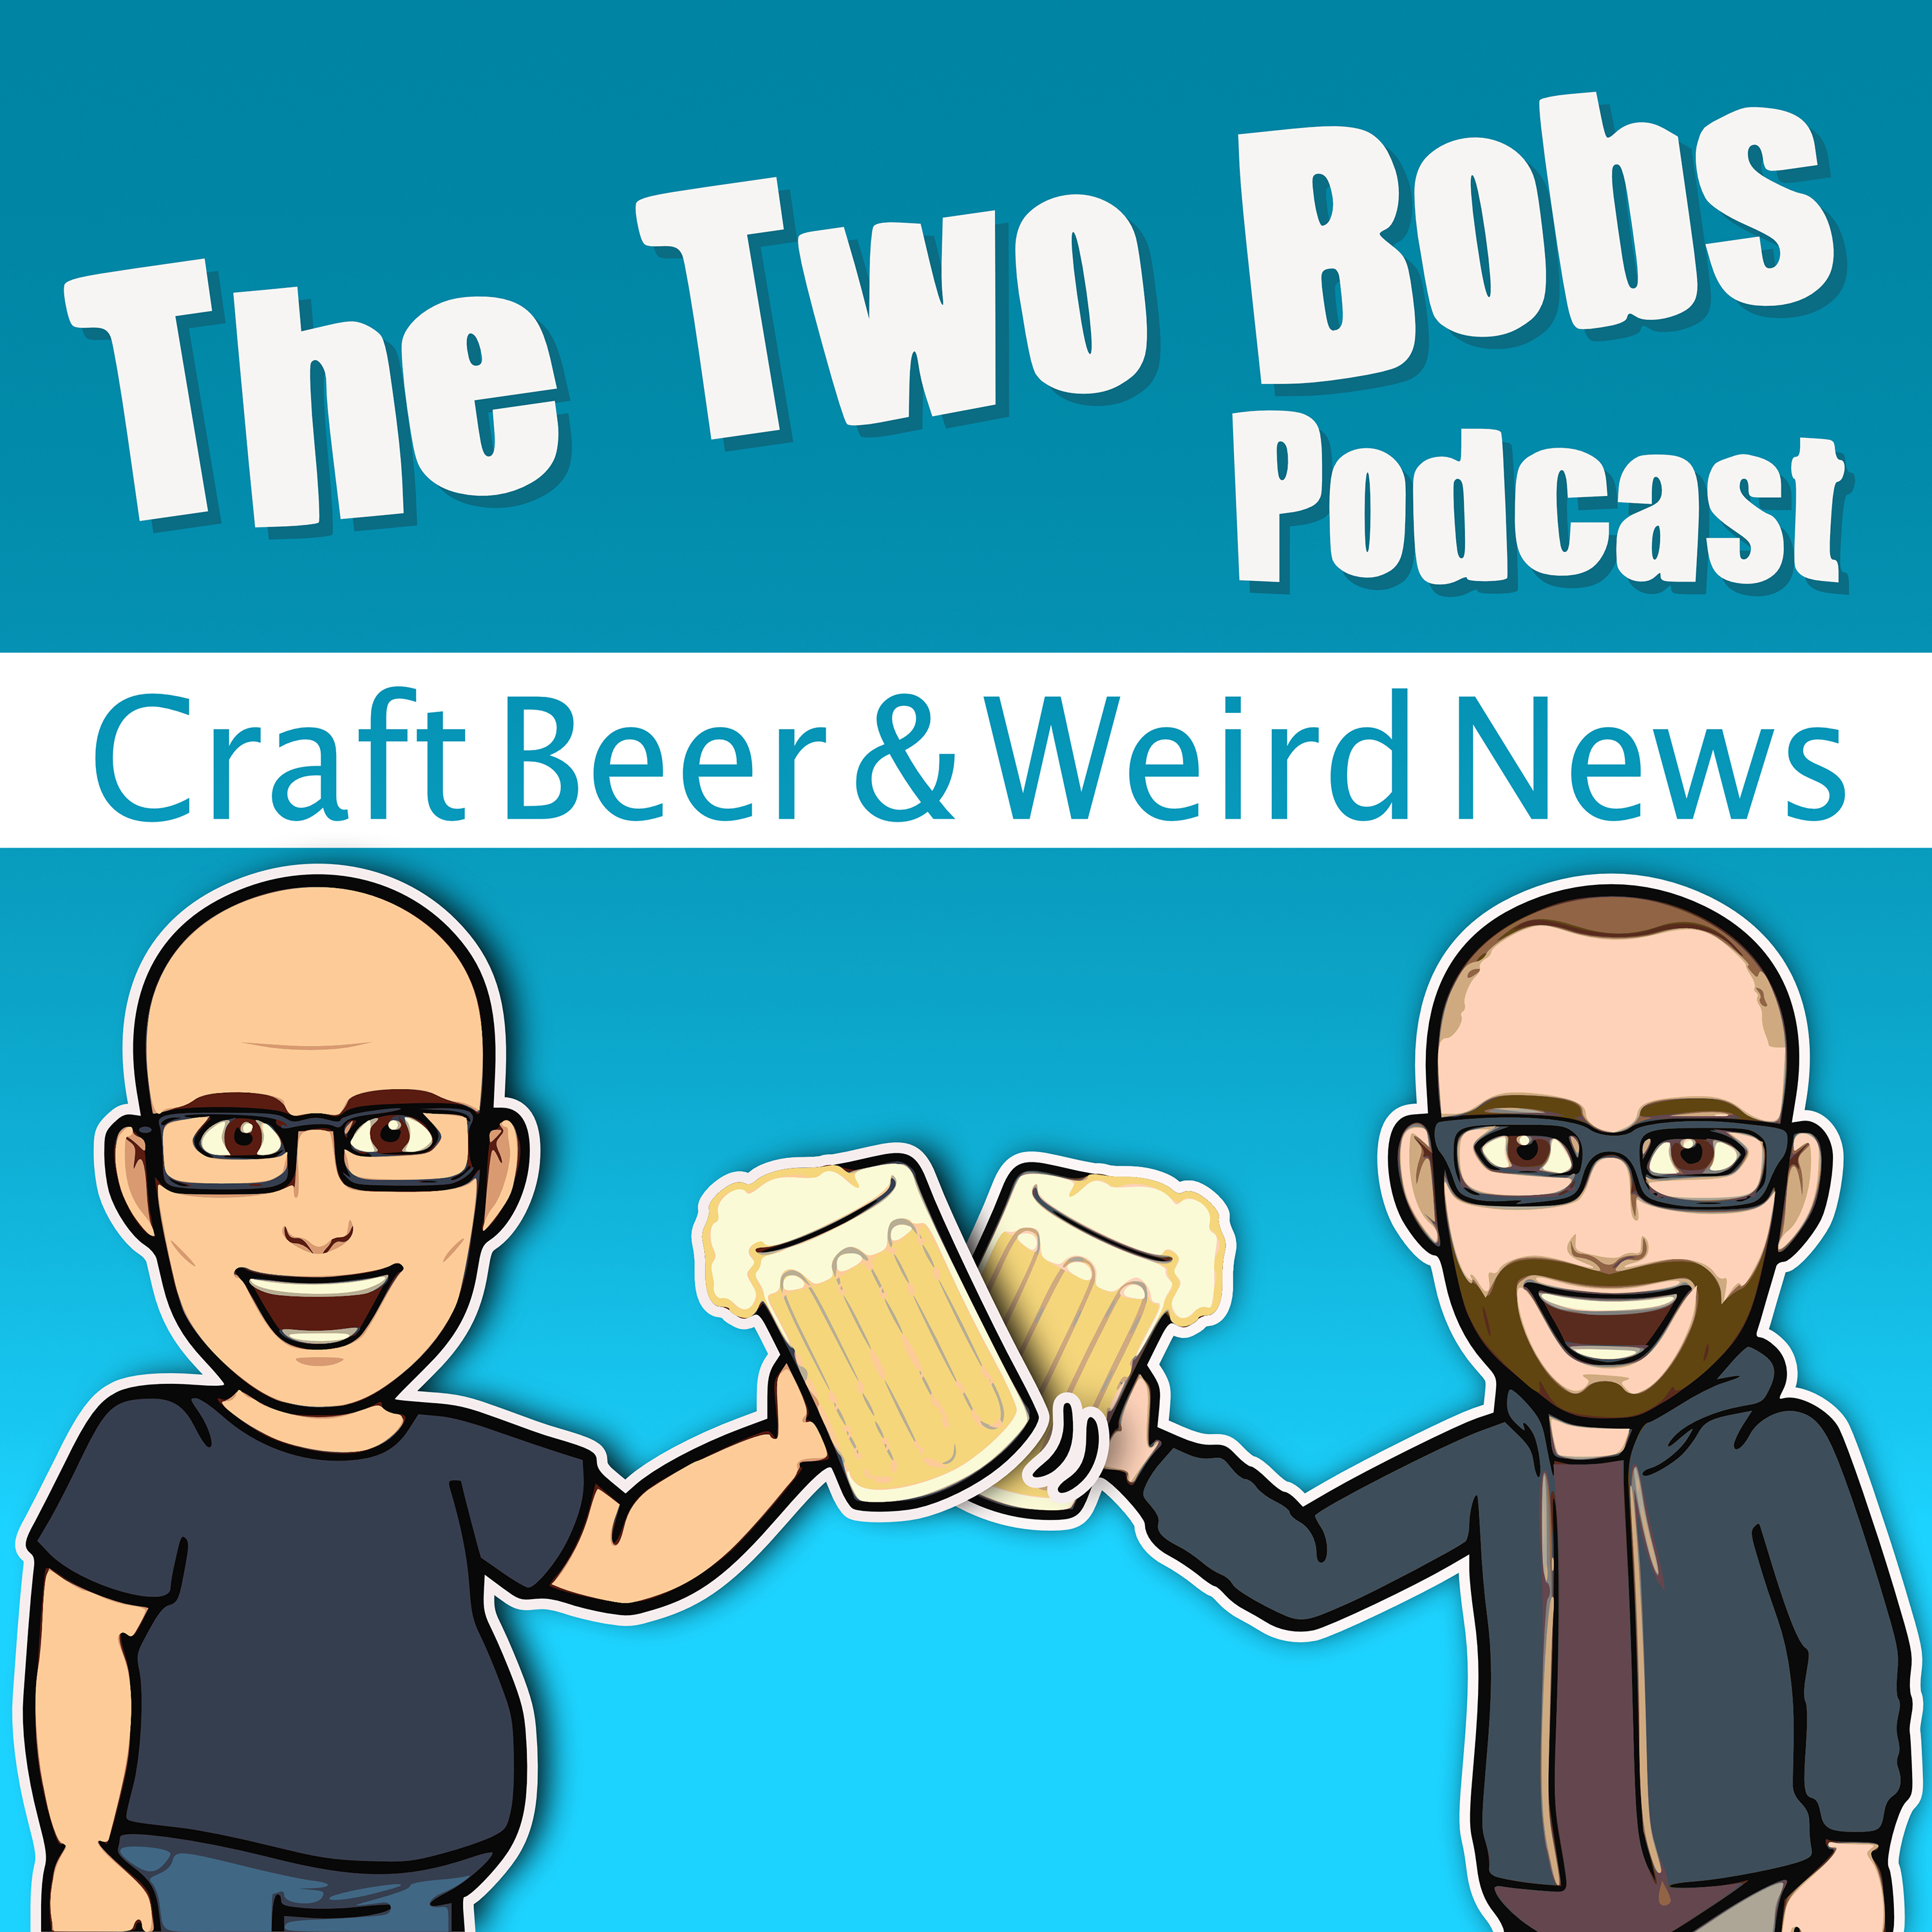 The Two Bobs Podcast